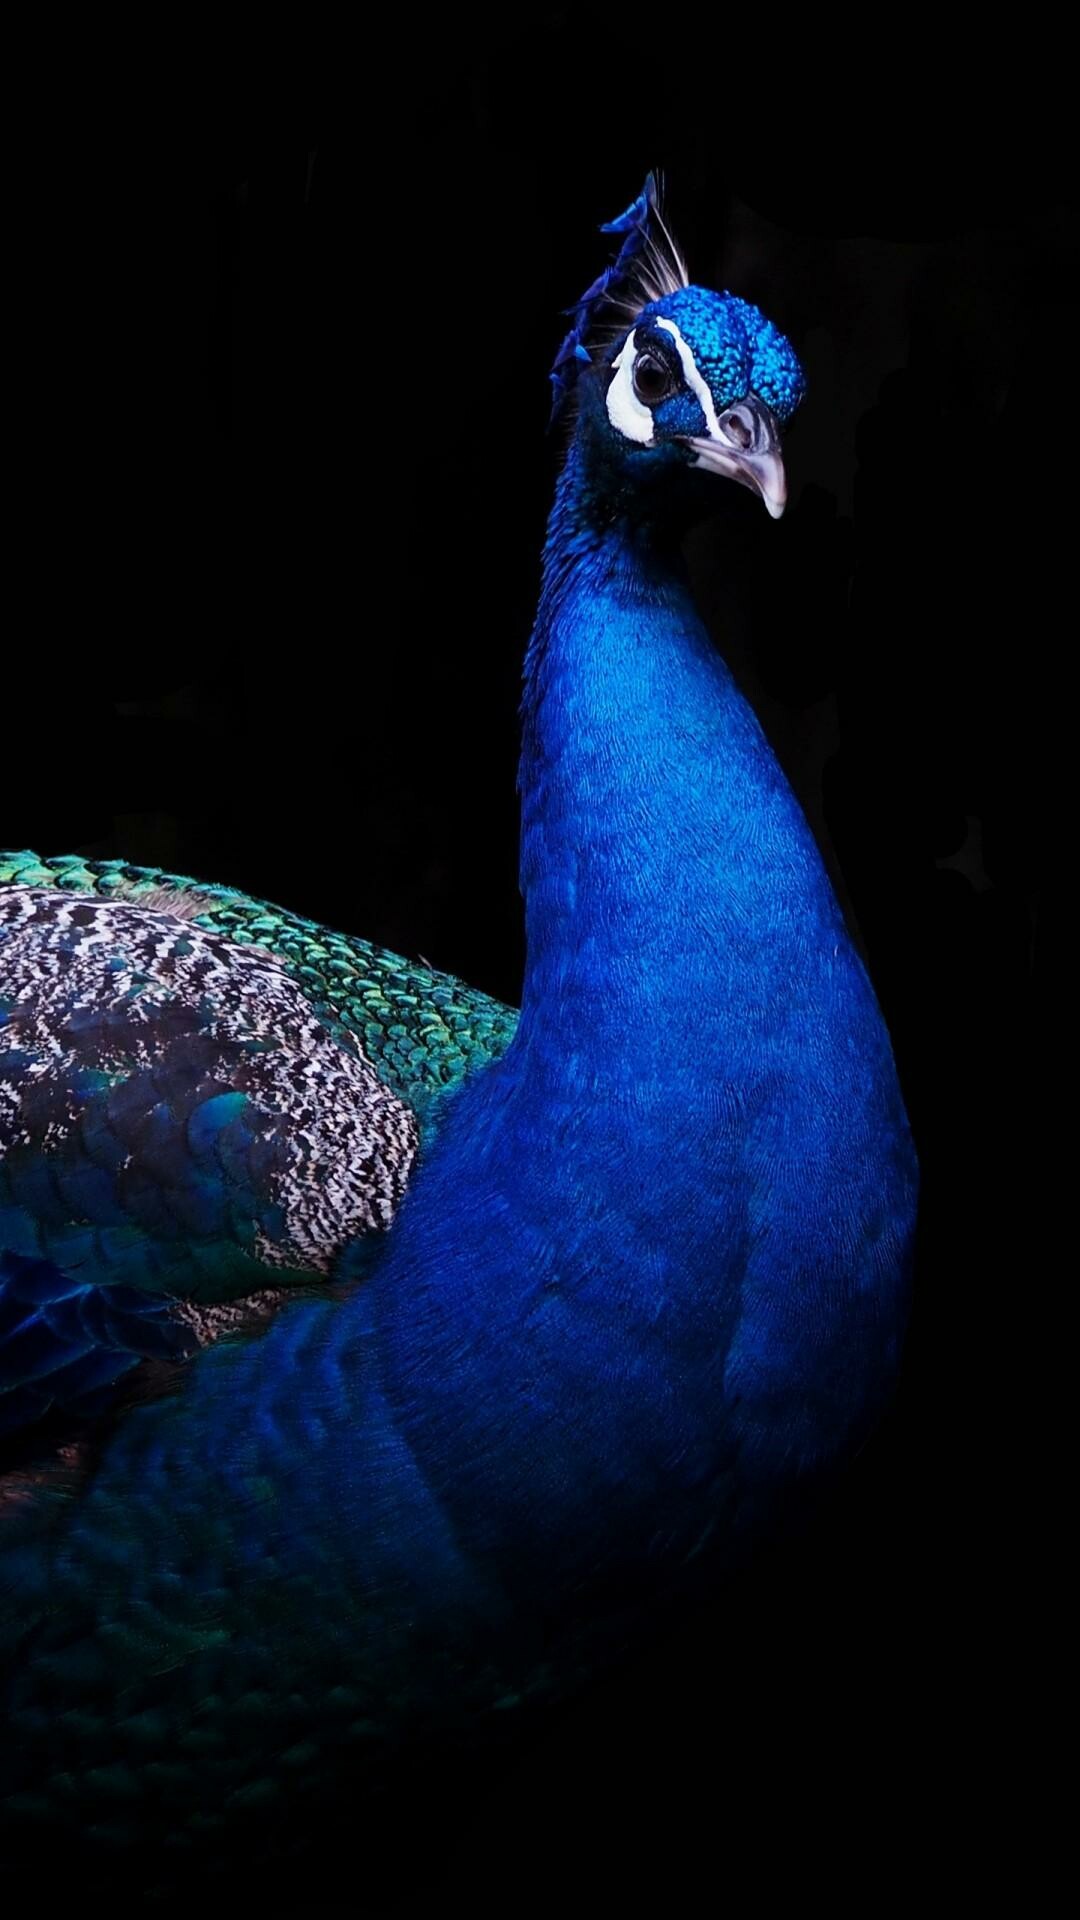 Peacock: One of the largest flying birds, Peafowl. 1080x1920 Full HD Wallpaper.